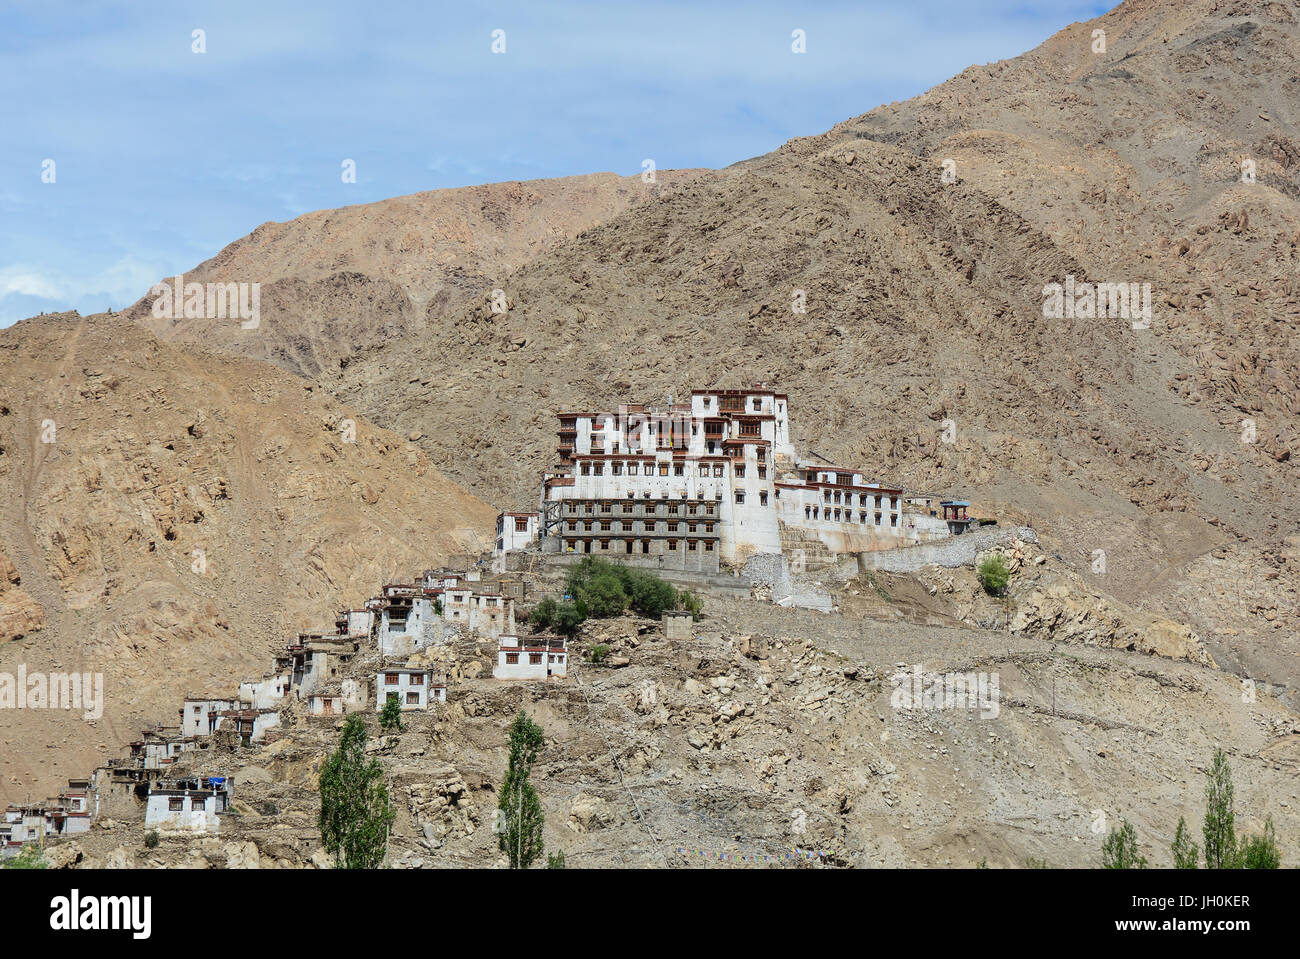 Thiksey Gompa located on the hill in Ladakh, India. The Monastery is noted for its resemblance to the Potala Palace in Lhasa, Tibet and is the largest Stock Photo